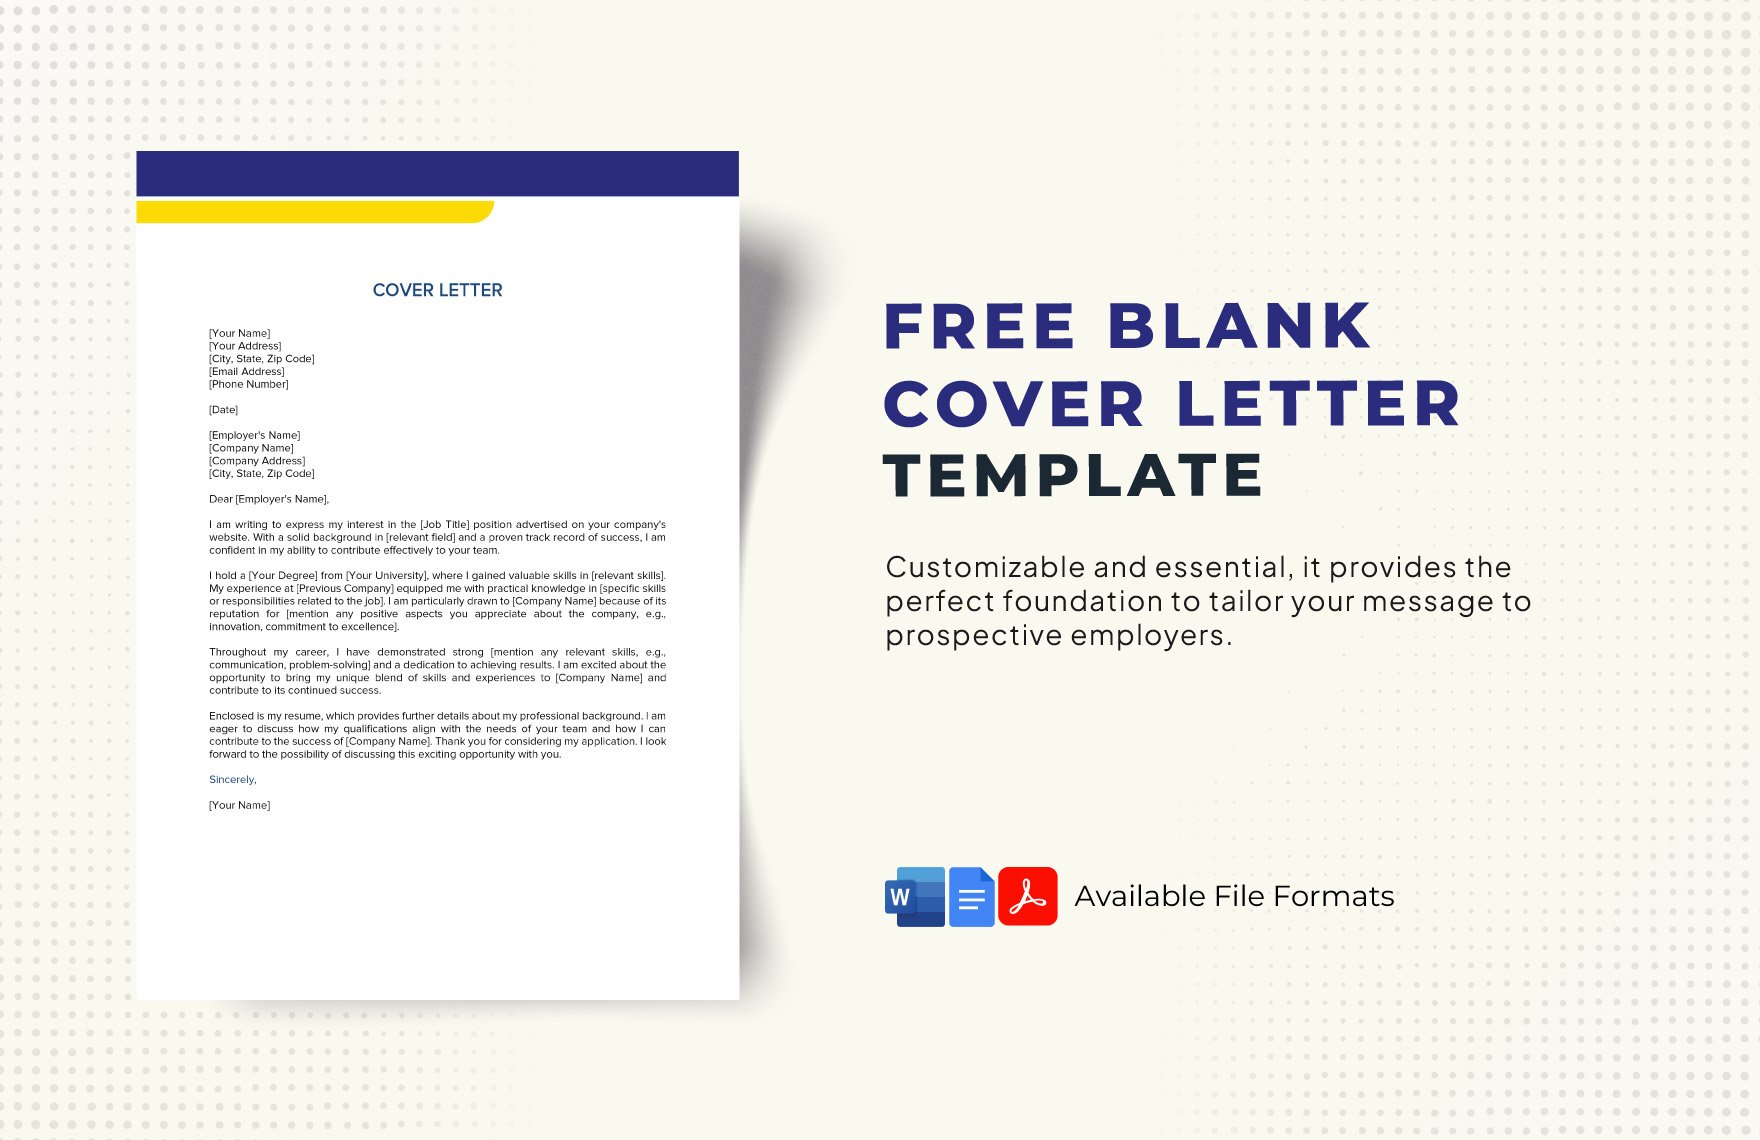 Blank Cover Letter Template